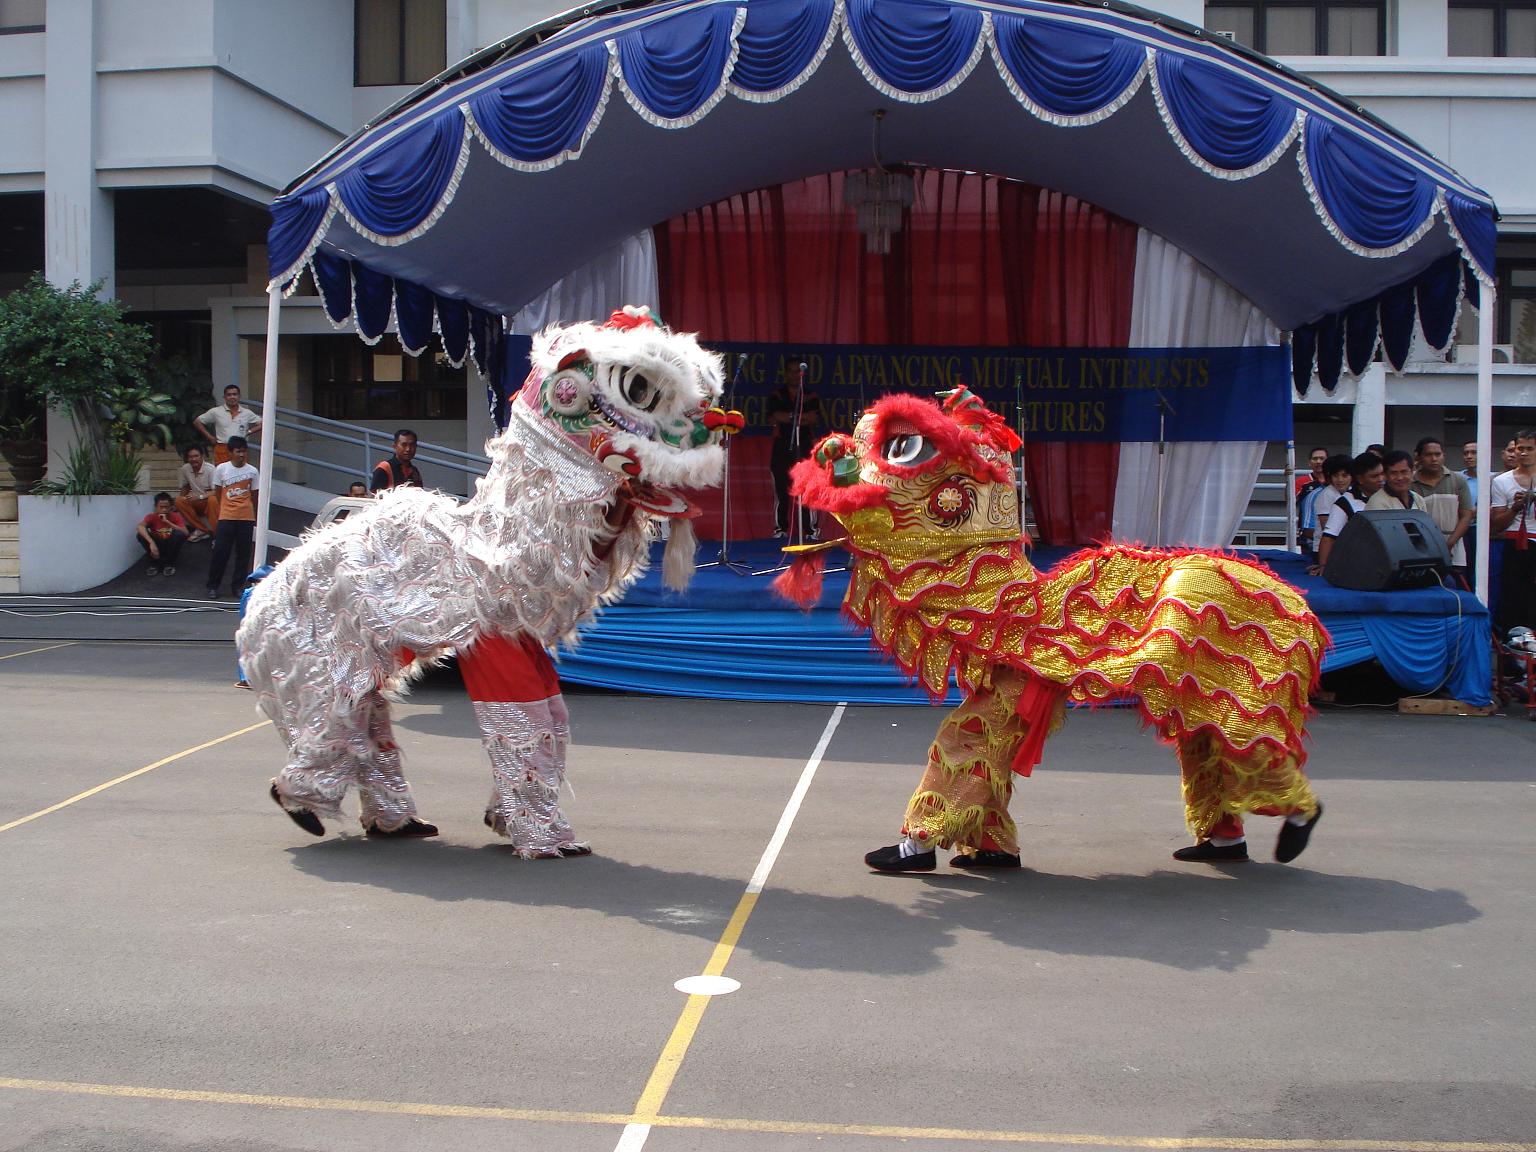 BBCnews: Millions prepare to celebrate Chinese Lunar New Year